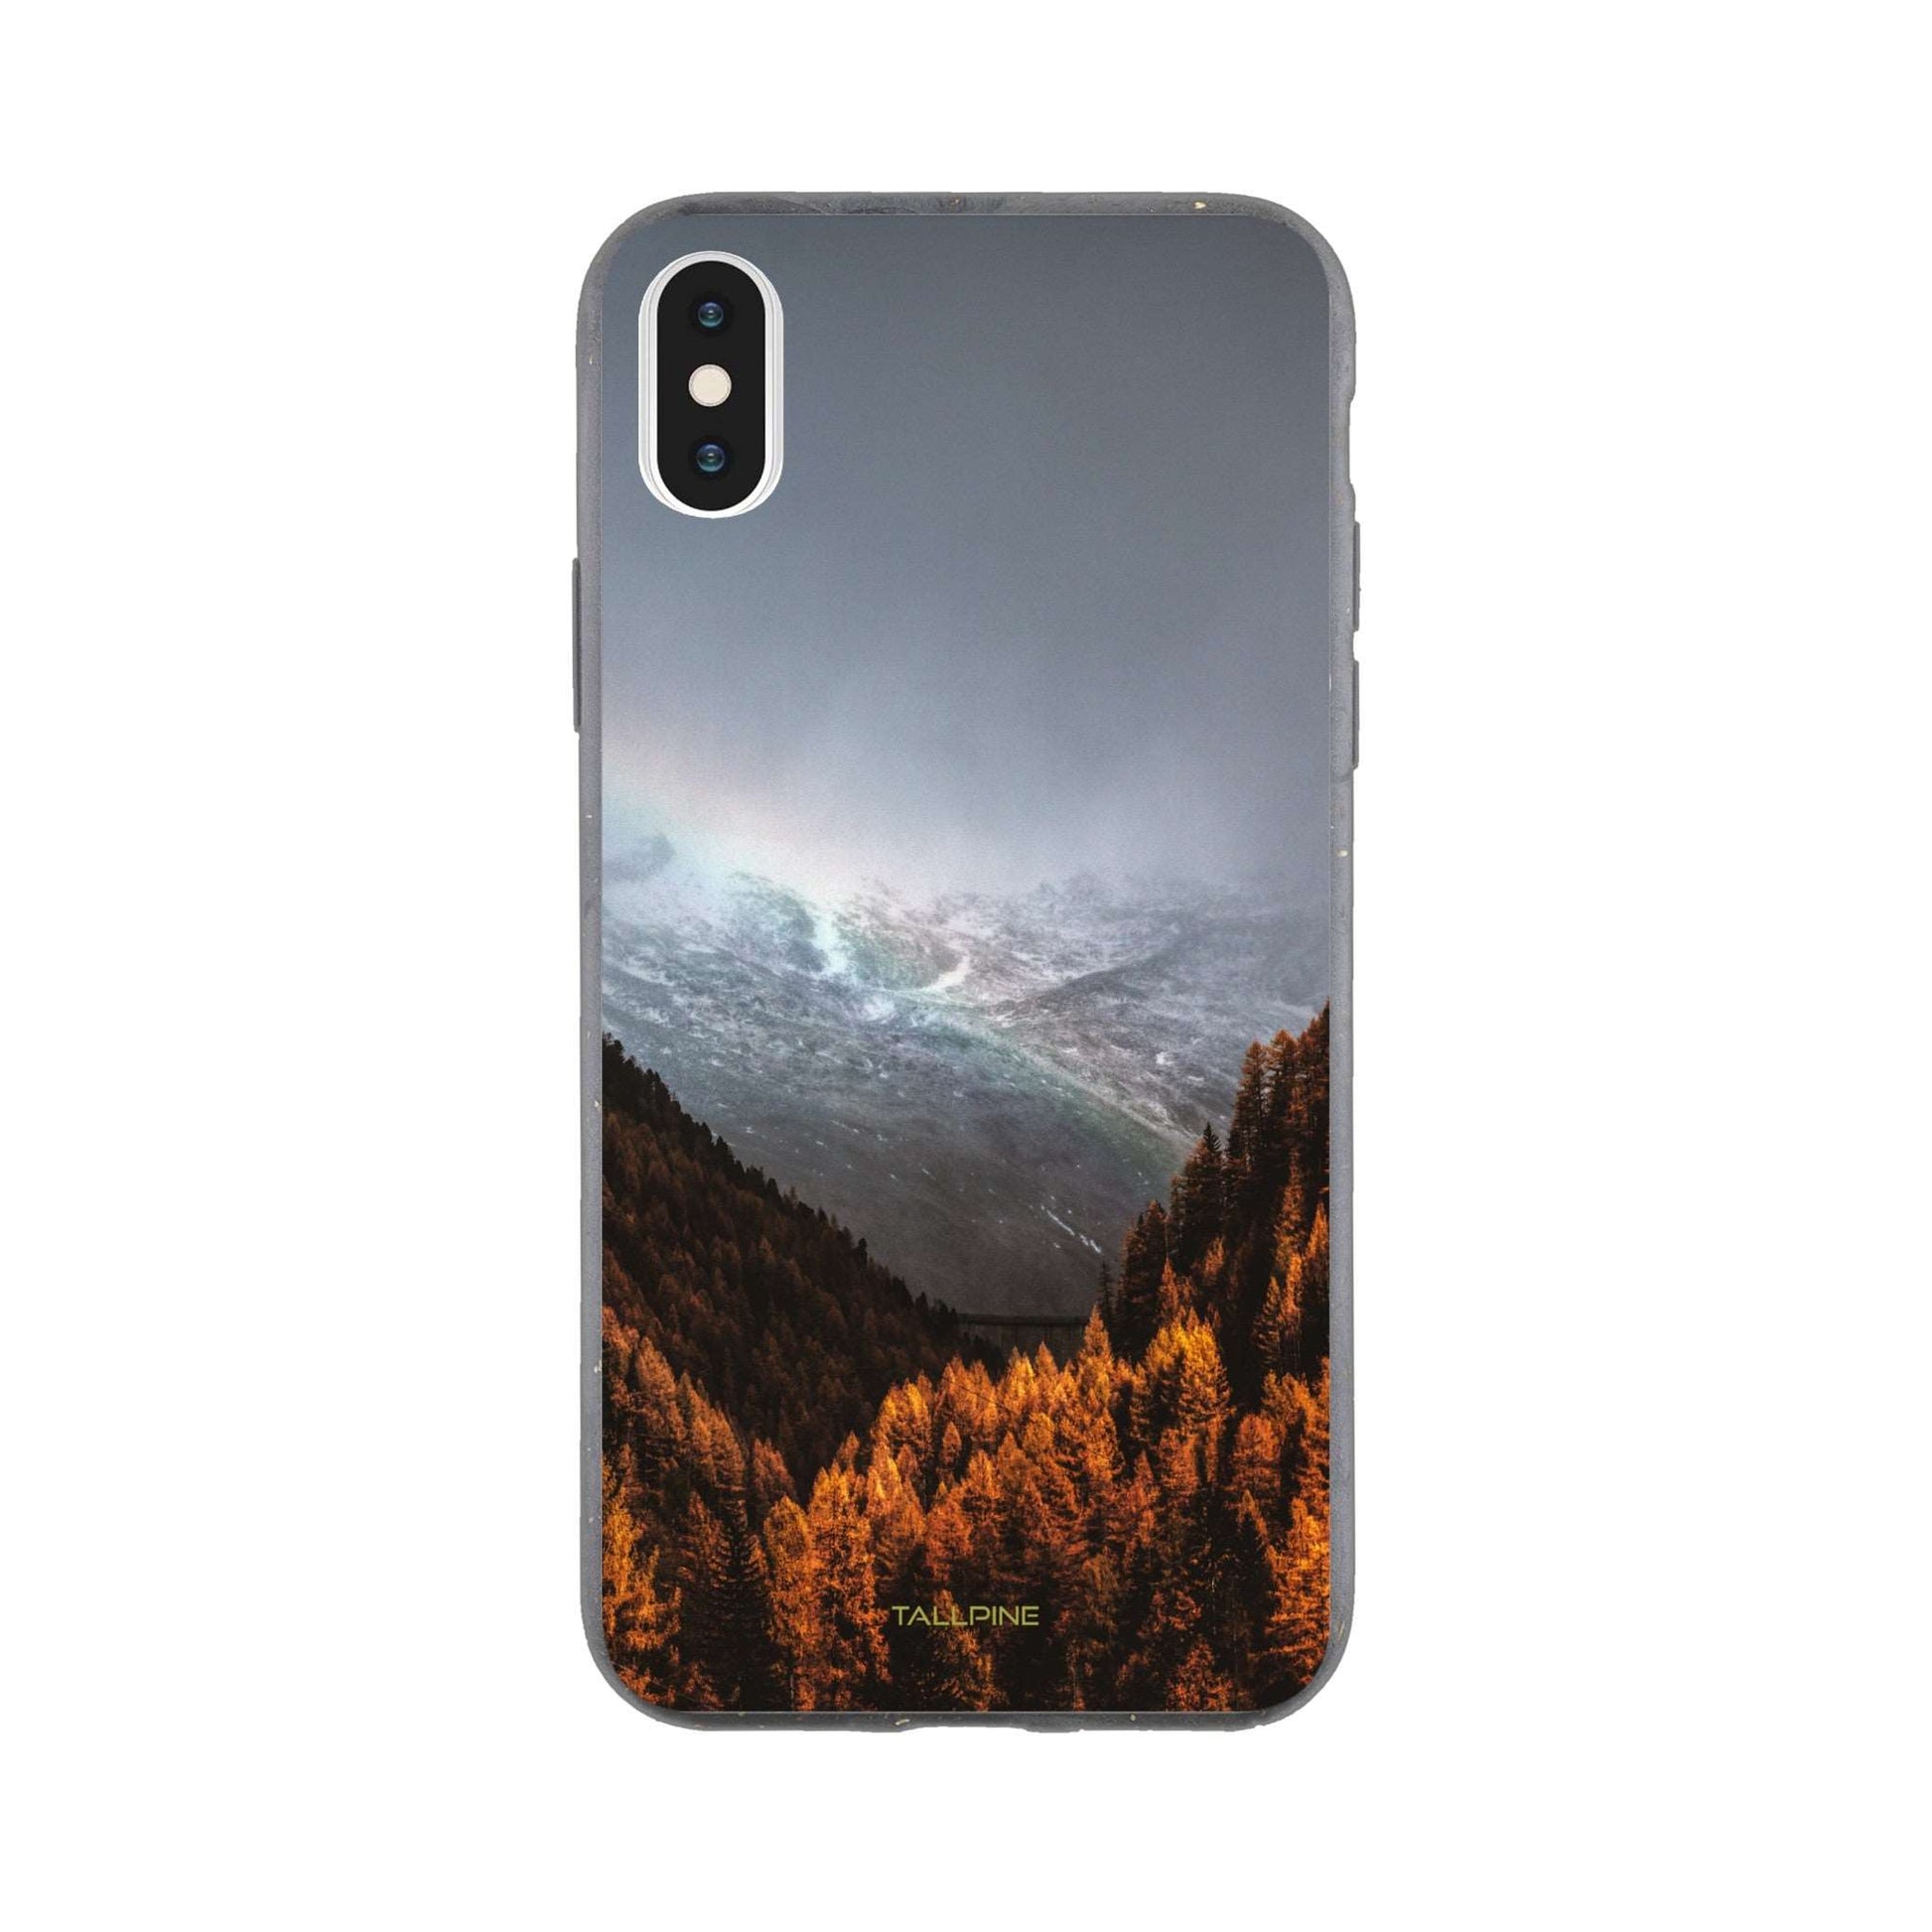 Autumn Mountain - Eco Case iPhone XS - Tallpine Cases | Sustainable and Eco-Friendly Phone Cases - Autumn Mountain Nature